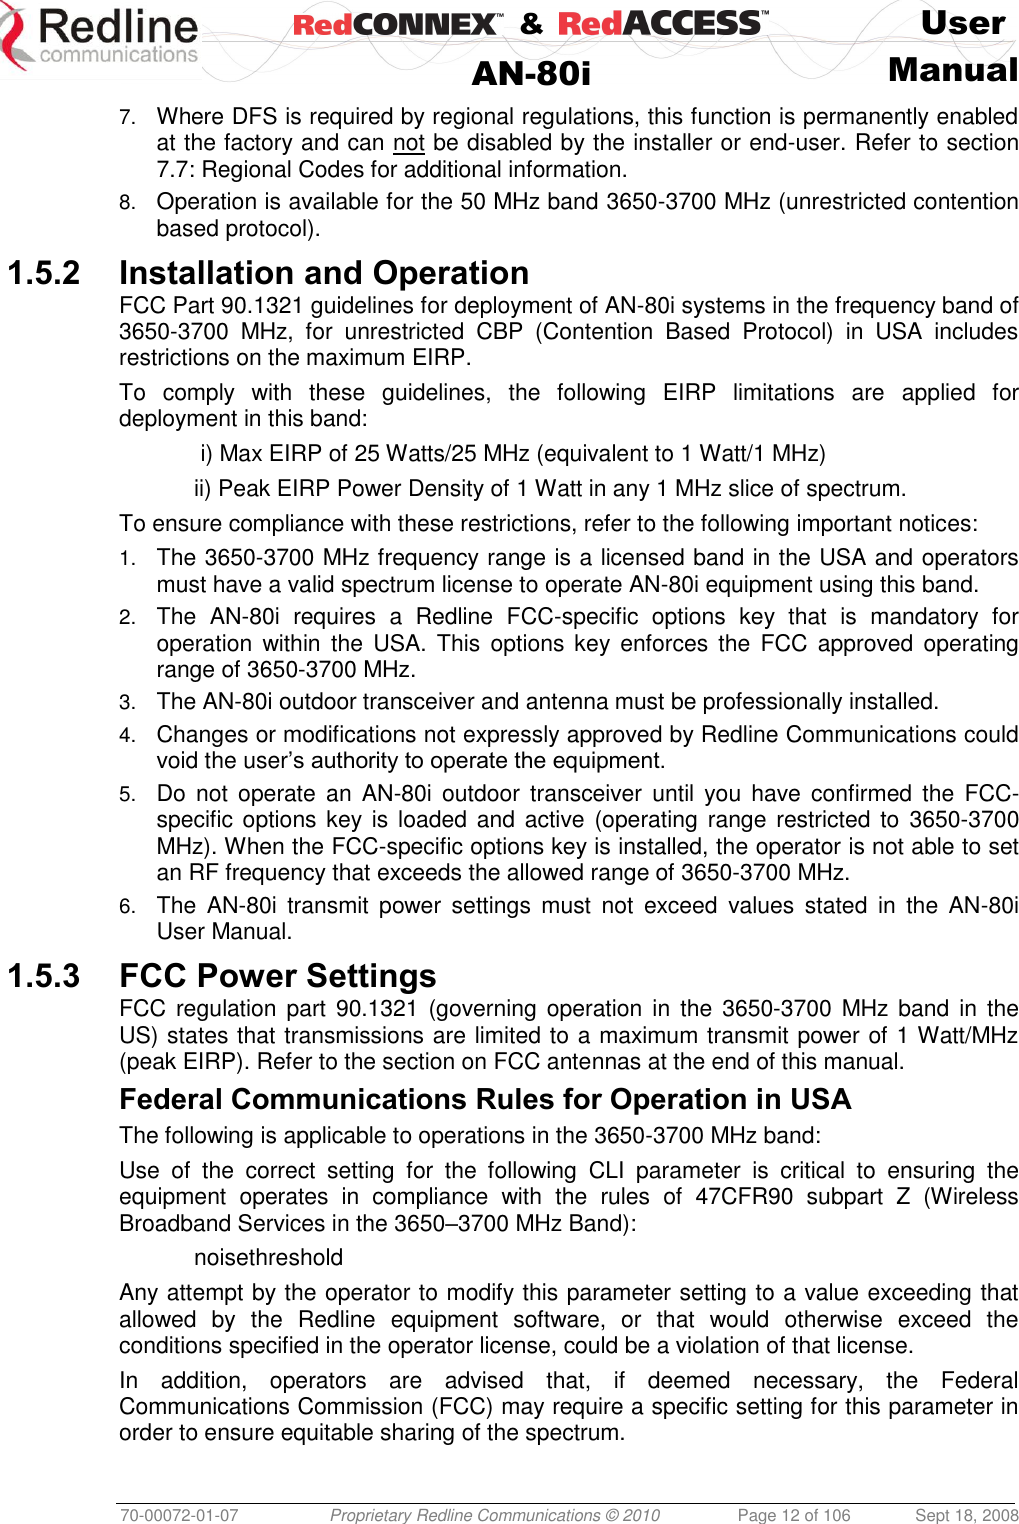    &amp;  User  AN-80i Manual  70-00072-01-07 Proprietary Redline Communications © 2010  Page 12 of 106  Sept 18, 2008 7. Where DFS is required by regional regulations, this function is permanently enabled at the factory and can not be disabled by the installer or end-user. Refer to section 7.7: Regional Codes for additional information. 8. Operation is available for the 50 MHz band 3650-3700 MHz (unrestricted contention based protocol). 1.5.2 Installation and Operation FCC Part 90.1321 guidelines for deployment of AN-80i systems in the frequency band of 3650-3700  MHz,  for  unrestricted  CBP  (Contention  Based  Protocol)  in  USA  includes restrictions on the maximum EIRP. To  comply  with  these  guidelines,  the  following  EIRP  limitations  are  applied  for deployment in this band:    i) Max EIRP of 25 Watts/25 MHz (equivalent to 1 Watt/1 MHz)   ii) Peak EIRP Power Density of 1 Watt in any 1 MHz slice of spectrum.  To ensure compliance with these restrictions, refer to the following important notices: 1. The 3650-3700 MHz frequency range is a licensed band in the USA and operators must have a valid spectrum license to operate AN-80i equipment using this band. 2. The  AN-80i  requires  a  Redline  FCC-specific  options  key  that  is  mandatory  for operation  within the  USA. This  options  key  enforces  the  FCC  approved  operating range of 3650-3700 MHz. 3. The AN-80i outdoor transceiver and antenna must be professionally installed. 4. Changes or modifications not expressly approved by Redline Communications could void the user’s authority to operate the equipment. 5. Do  not  operate  an  AN-80i  outdoor  transceiver  until  you  have confirmed  the  FCC-specific options  key is  loaded and active (operating range restricted to  3650-3700 MHz). When the FCC-specific options key is installed, the operator is not able to set an RF frequency that exceeds the allowed range of 3650-3700 MHz. 6. The  AN-80i  transmit  power  settings  must  not  exceed  values  stated  in  the  AN-80i User Manual. 1.5.3 FCC Power Settings FCC regulation  part  90.1321  (governing operation  in  the  3650-3700  MHz band in the US) states that transmissions are limited to a maximum transmit power of 1 Watt/MHz (peak EIRP). Refer to the section on FCC antennas at the end of this manual. Federal Communications Rules for Operation in USA The following is applicable to operations in the 3650-3700 MHz band: Use  of  the  correct  setting  for  the  following  CLI  parameter  is  critical  to  ensuring  the equipment  operates  in  compliance  with  the  rules  of  47CFR90  subpart  Z  (Wireless Broadband Services in the 3650–3700 MHz Band):   noisethreshold Any attempt by the operator to modify this parameter setting to a value exceeding that allowed  by  the  Redline  equipment  software,  or  that  would  otherwise  exceed  the conditions specified in the operator license, could be a violation of that license. In  addition,  operators  are  advised  that,  if  deemed  necessary,  the  Federal Communications Commission (FCC) may require a specific setting for this parameter in order to ensure equitable sharing of the spectrum. 